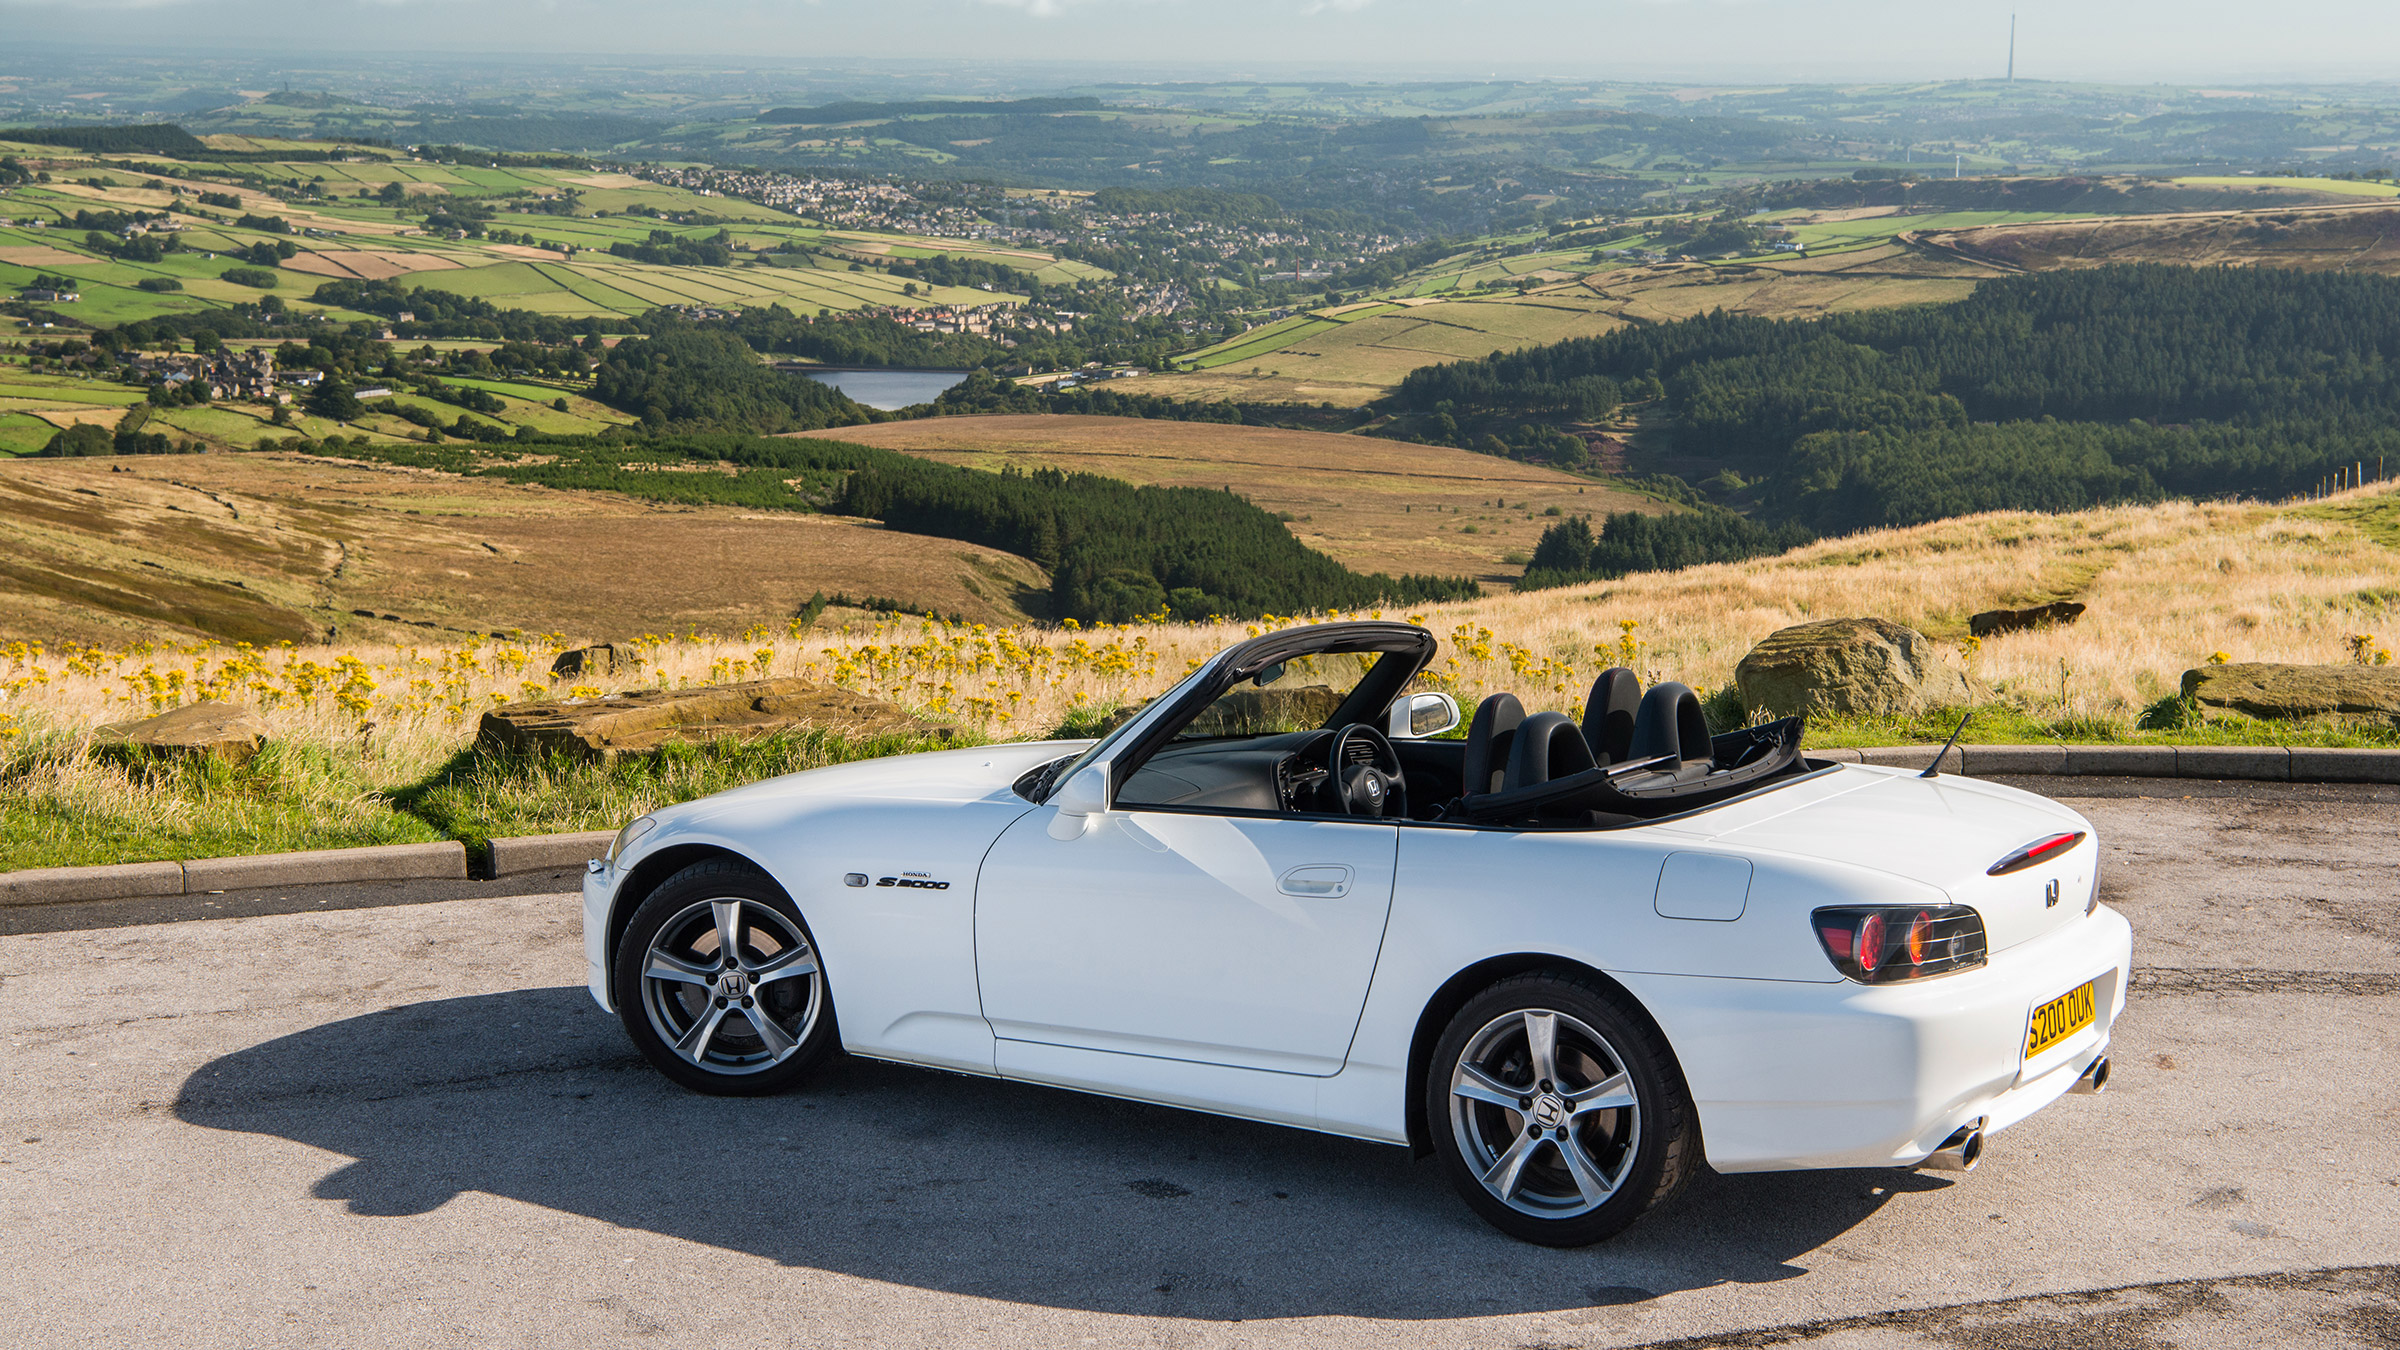 Honda S2000: review, history and specs of an icon | evo